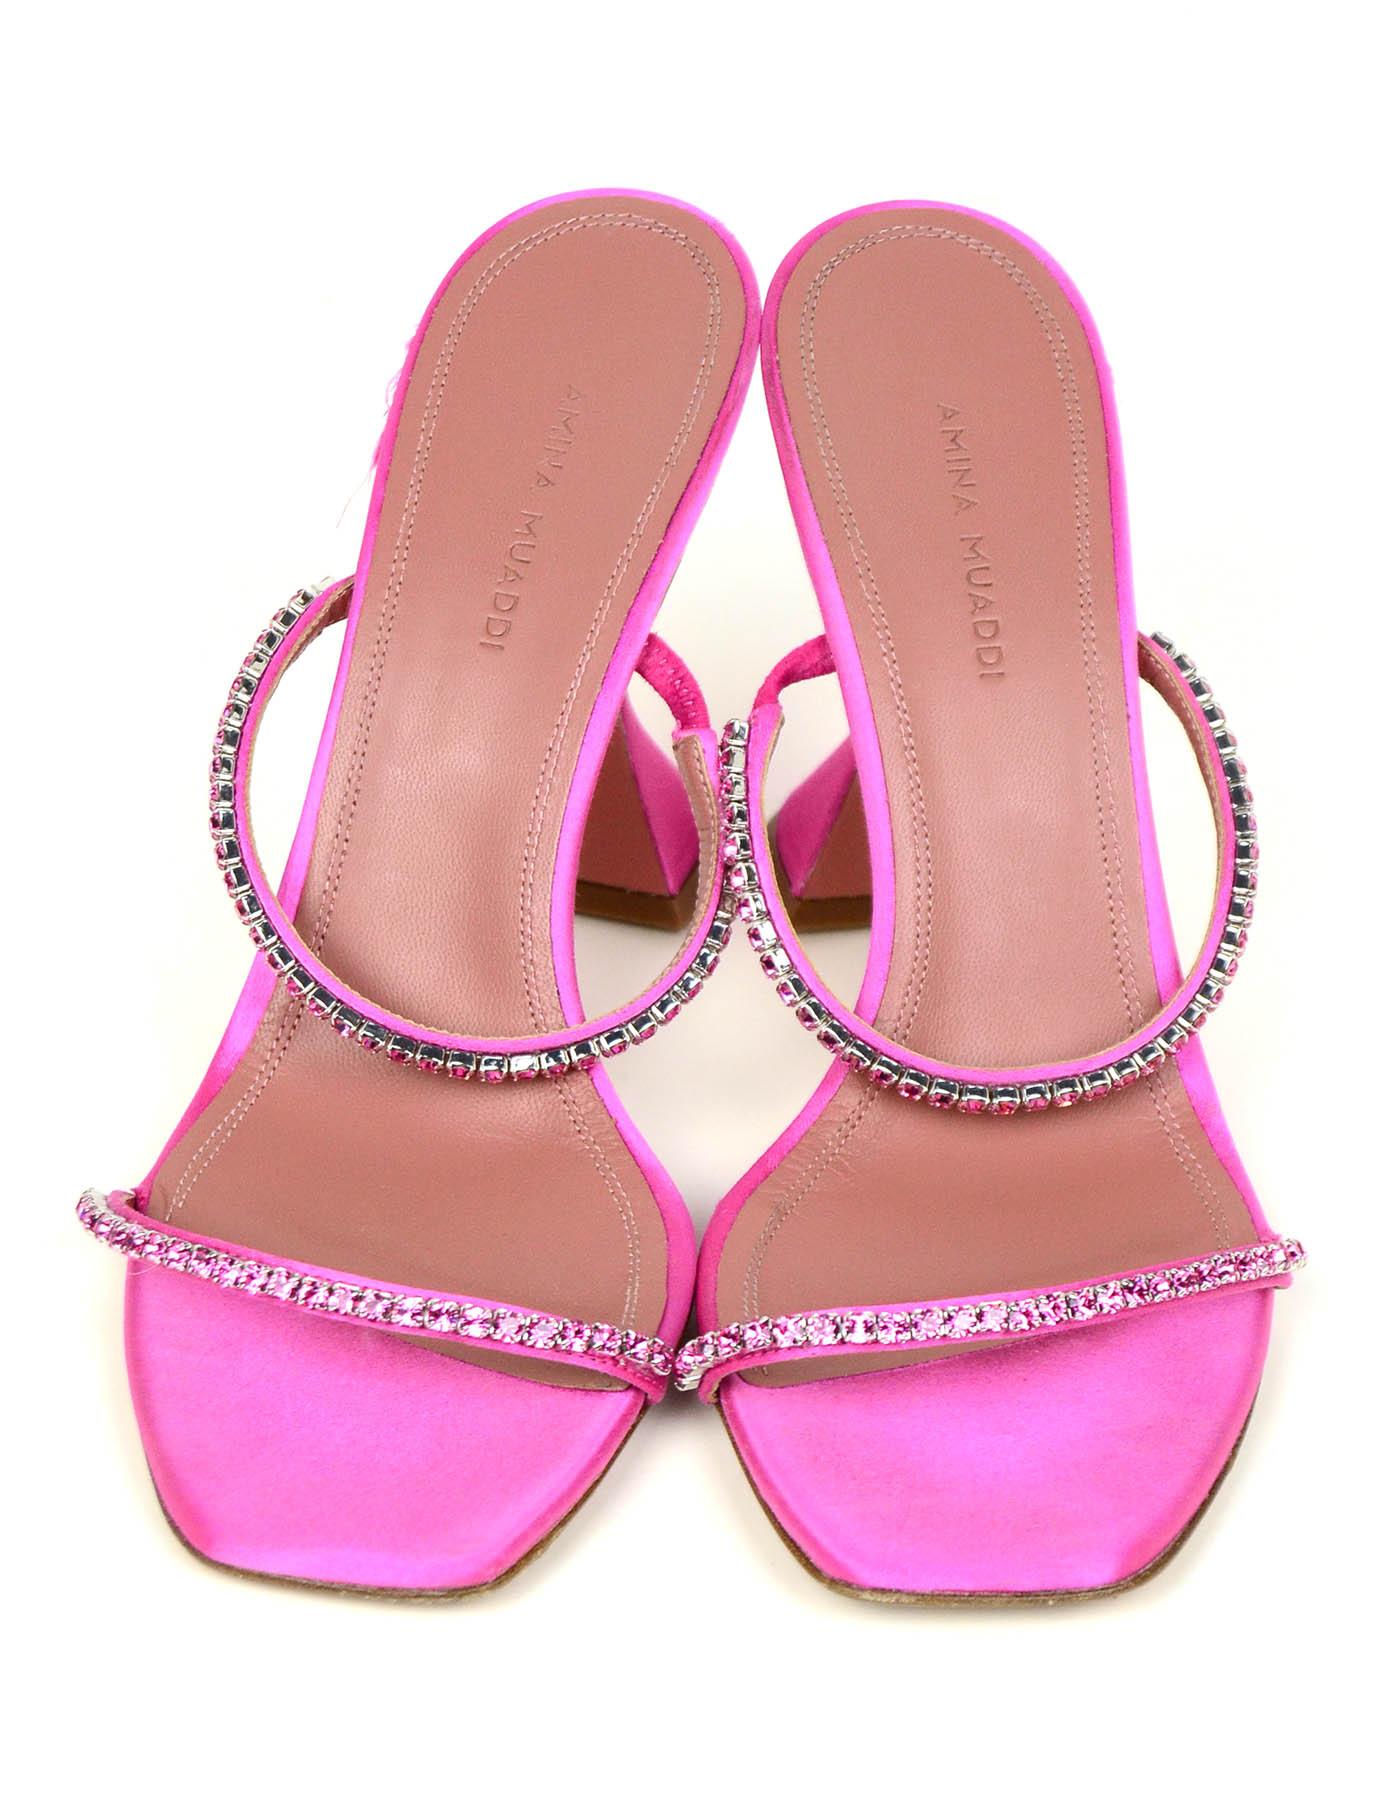 Amina Muaddi Pink Gilda Satin Embellished Sandals Slides sz 39

Made In: Italy
Year of Production: 2020
Color: Pink
Hardware: Silvertone
Materials: Satin and crystal
Closure/Opening: Slide on with elastic at top strap
Overall Condition: Very good.